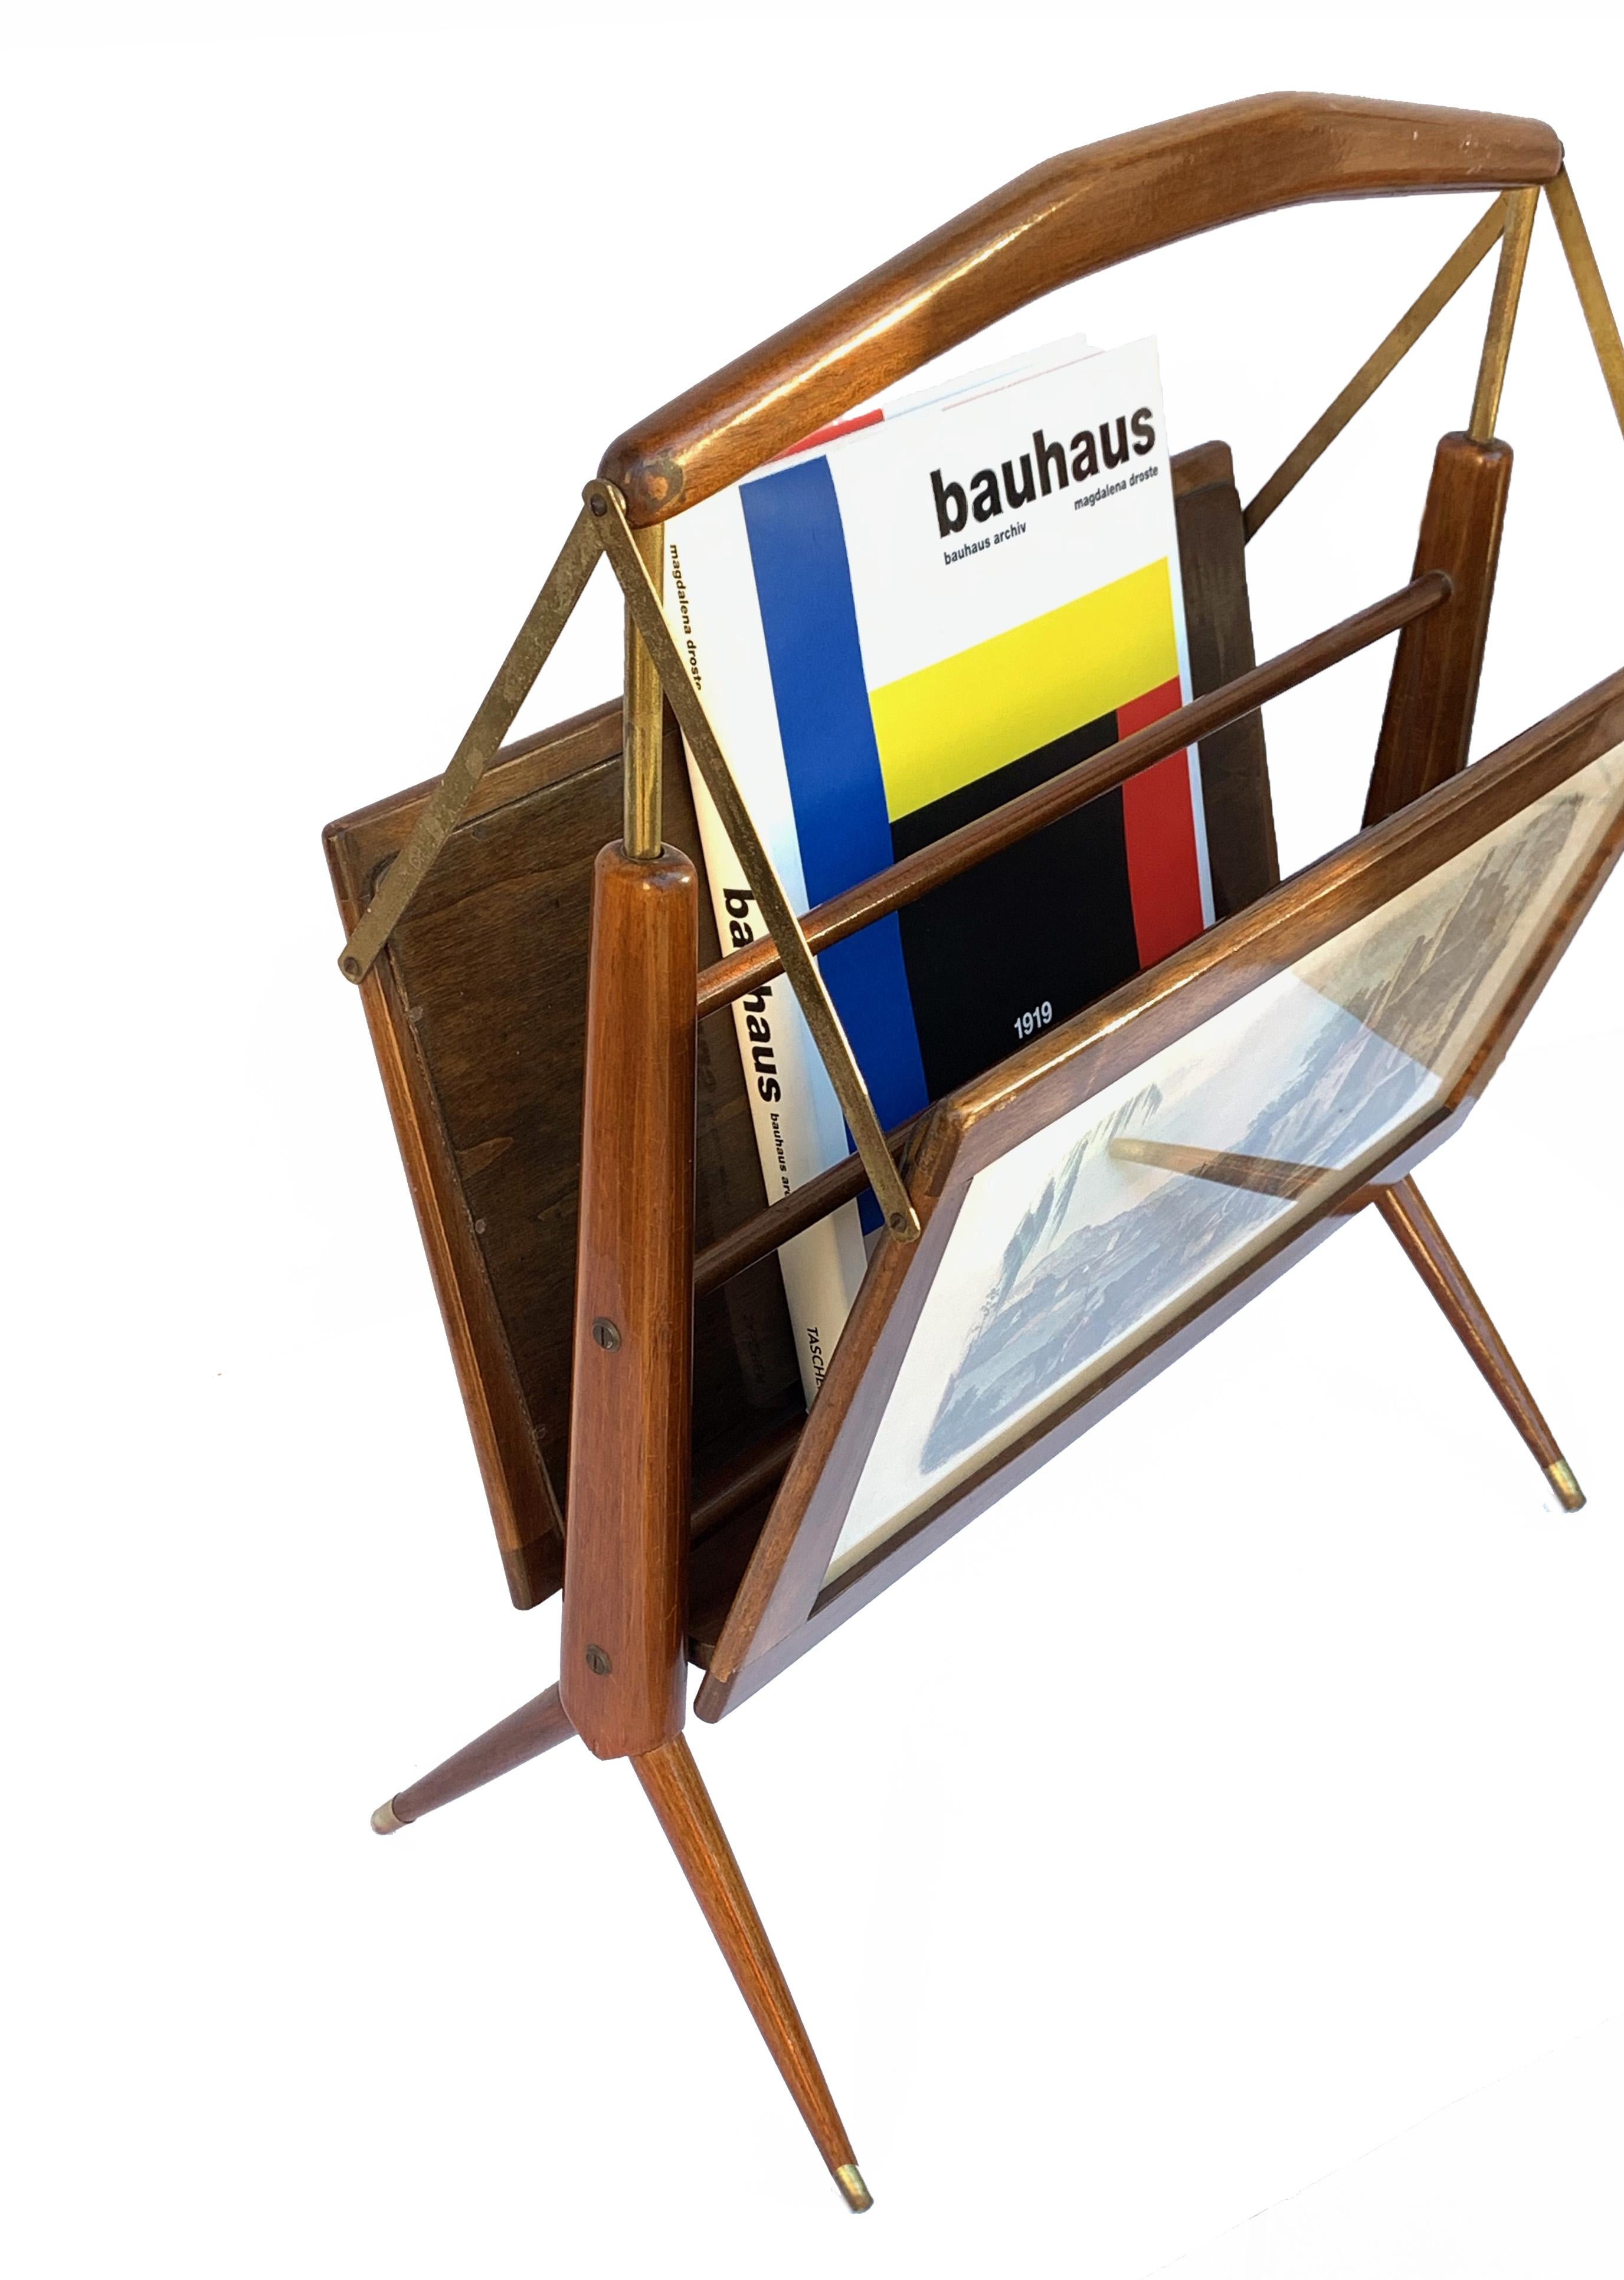 Folding magazine rack from the 1950s in beech and brass details.
It has two watercolor engravings depicting landscapes on each side affixed behind the glass.